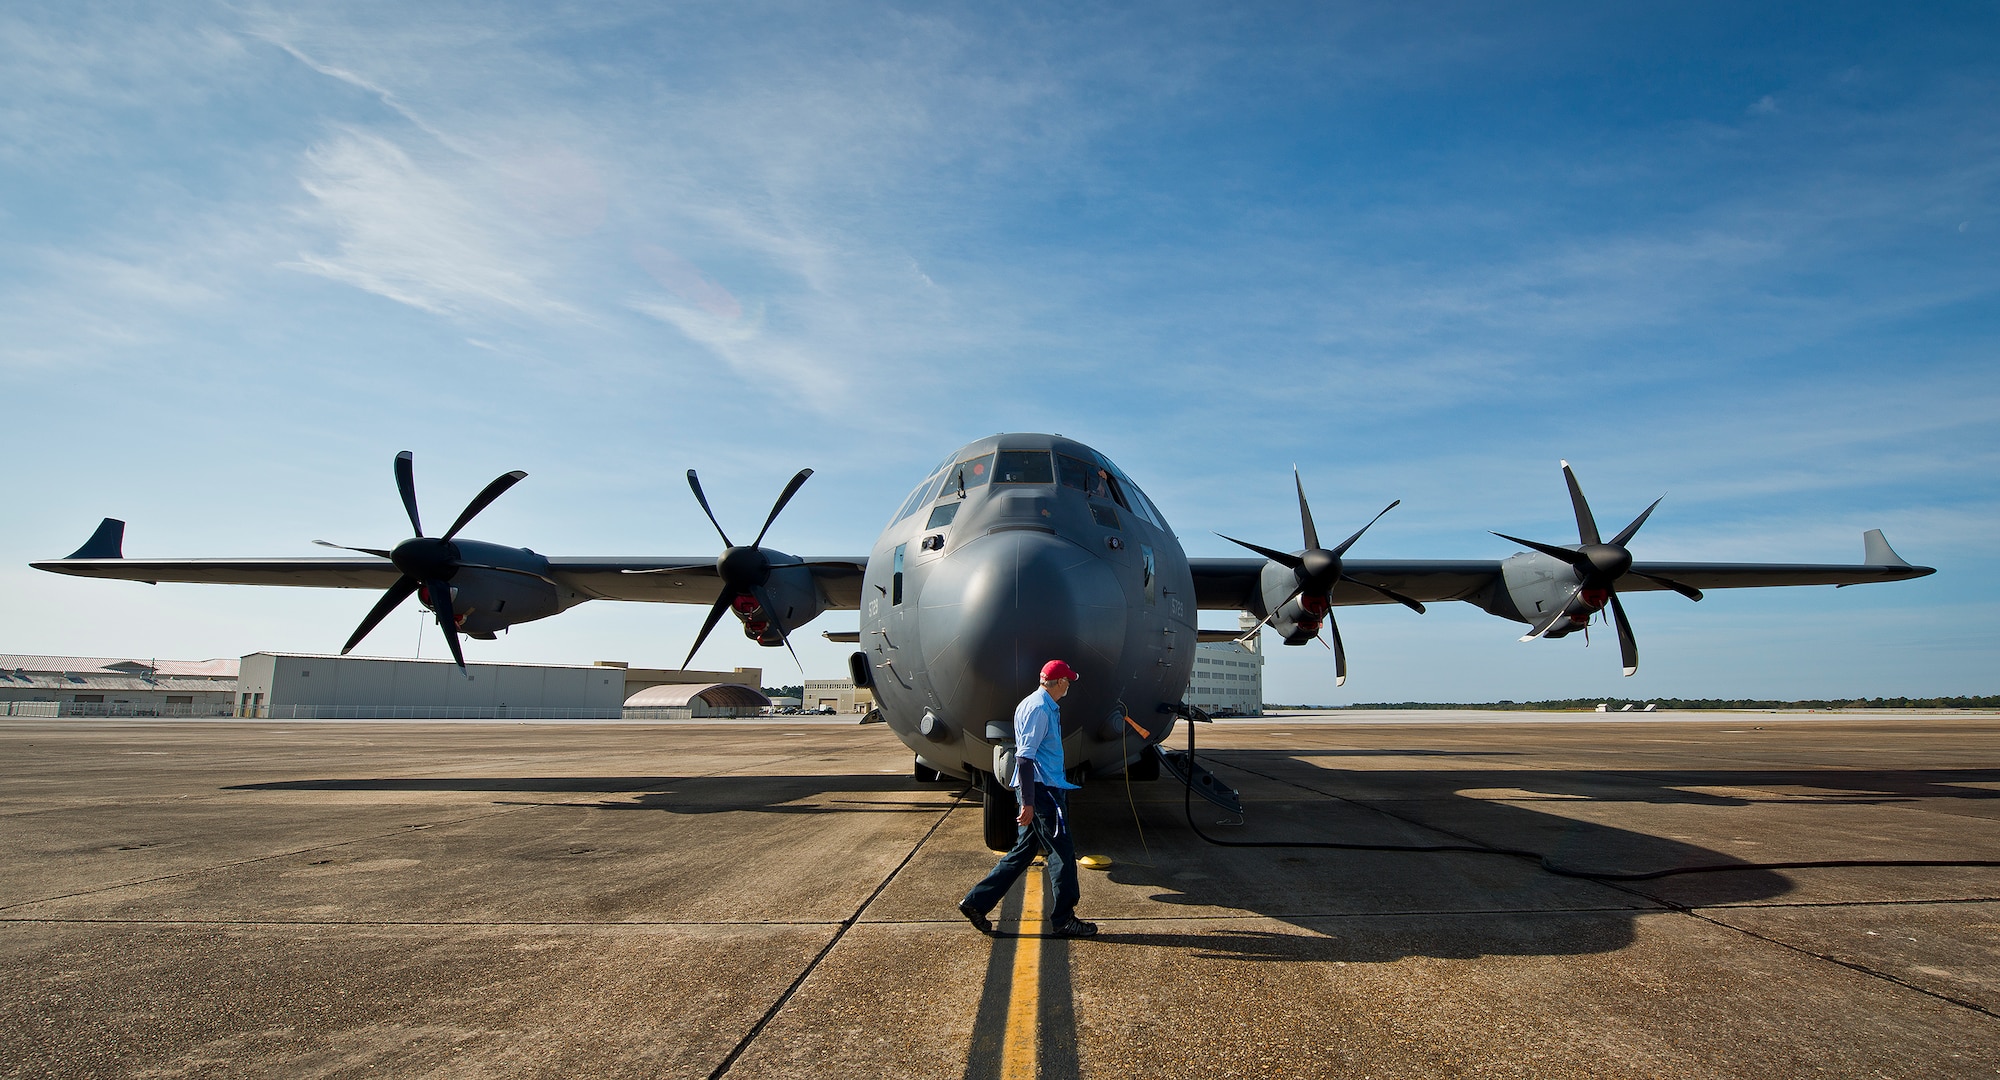 Earl Haun, a Lockheed Martin maintenance contractor with the 413th Flight Test Squadron, walks around a modified MC-130J during preflight checks at Eglin Air Force Base, Fla. The aircraft was fitted with vertical fins on each wing, called winglets.  The 413th Flight Test Squadron aircrew and engineers tested the modified aircraft over eight flights.  The goal of the tests was to collect data on possible fuel efficiency improvements and performance with the winglets and lift distribution control system installed.  (U.S. Air Force photo/Samuel King Jr.)